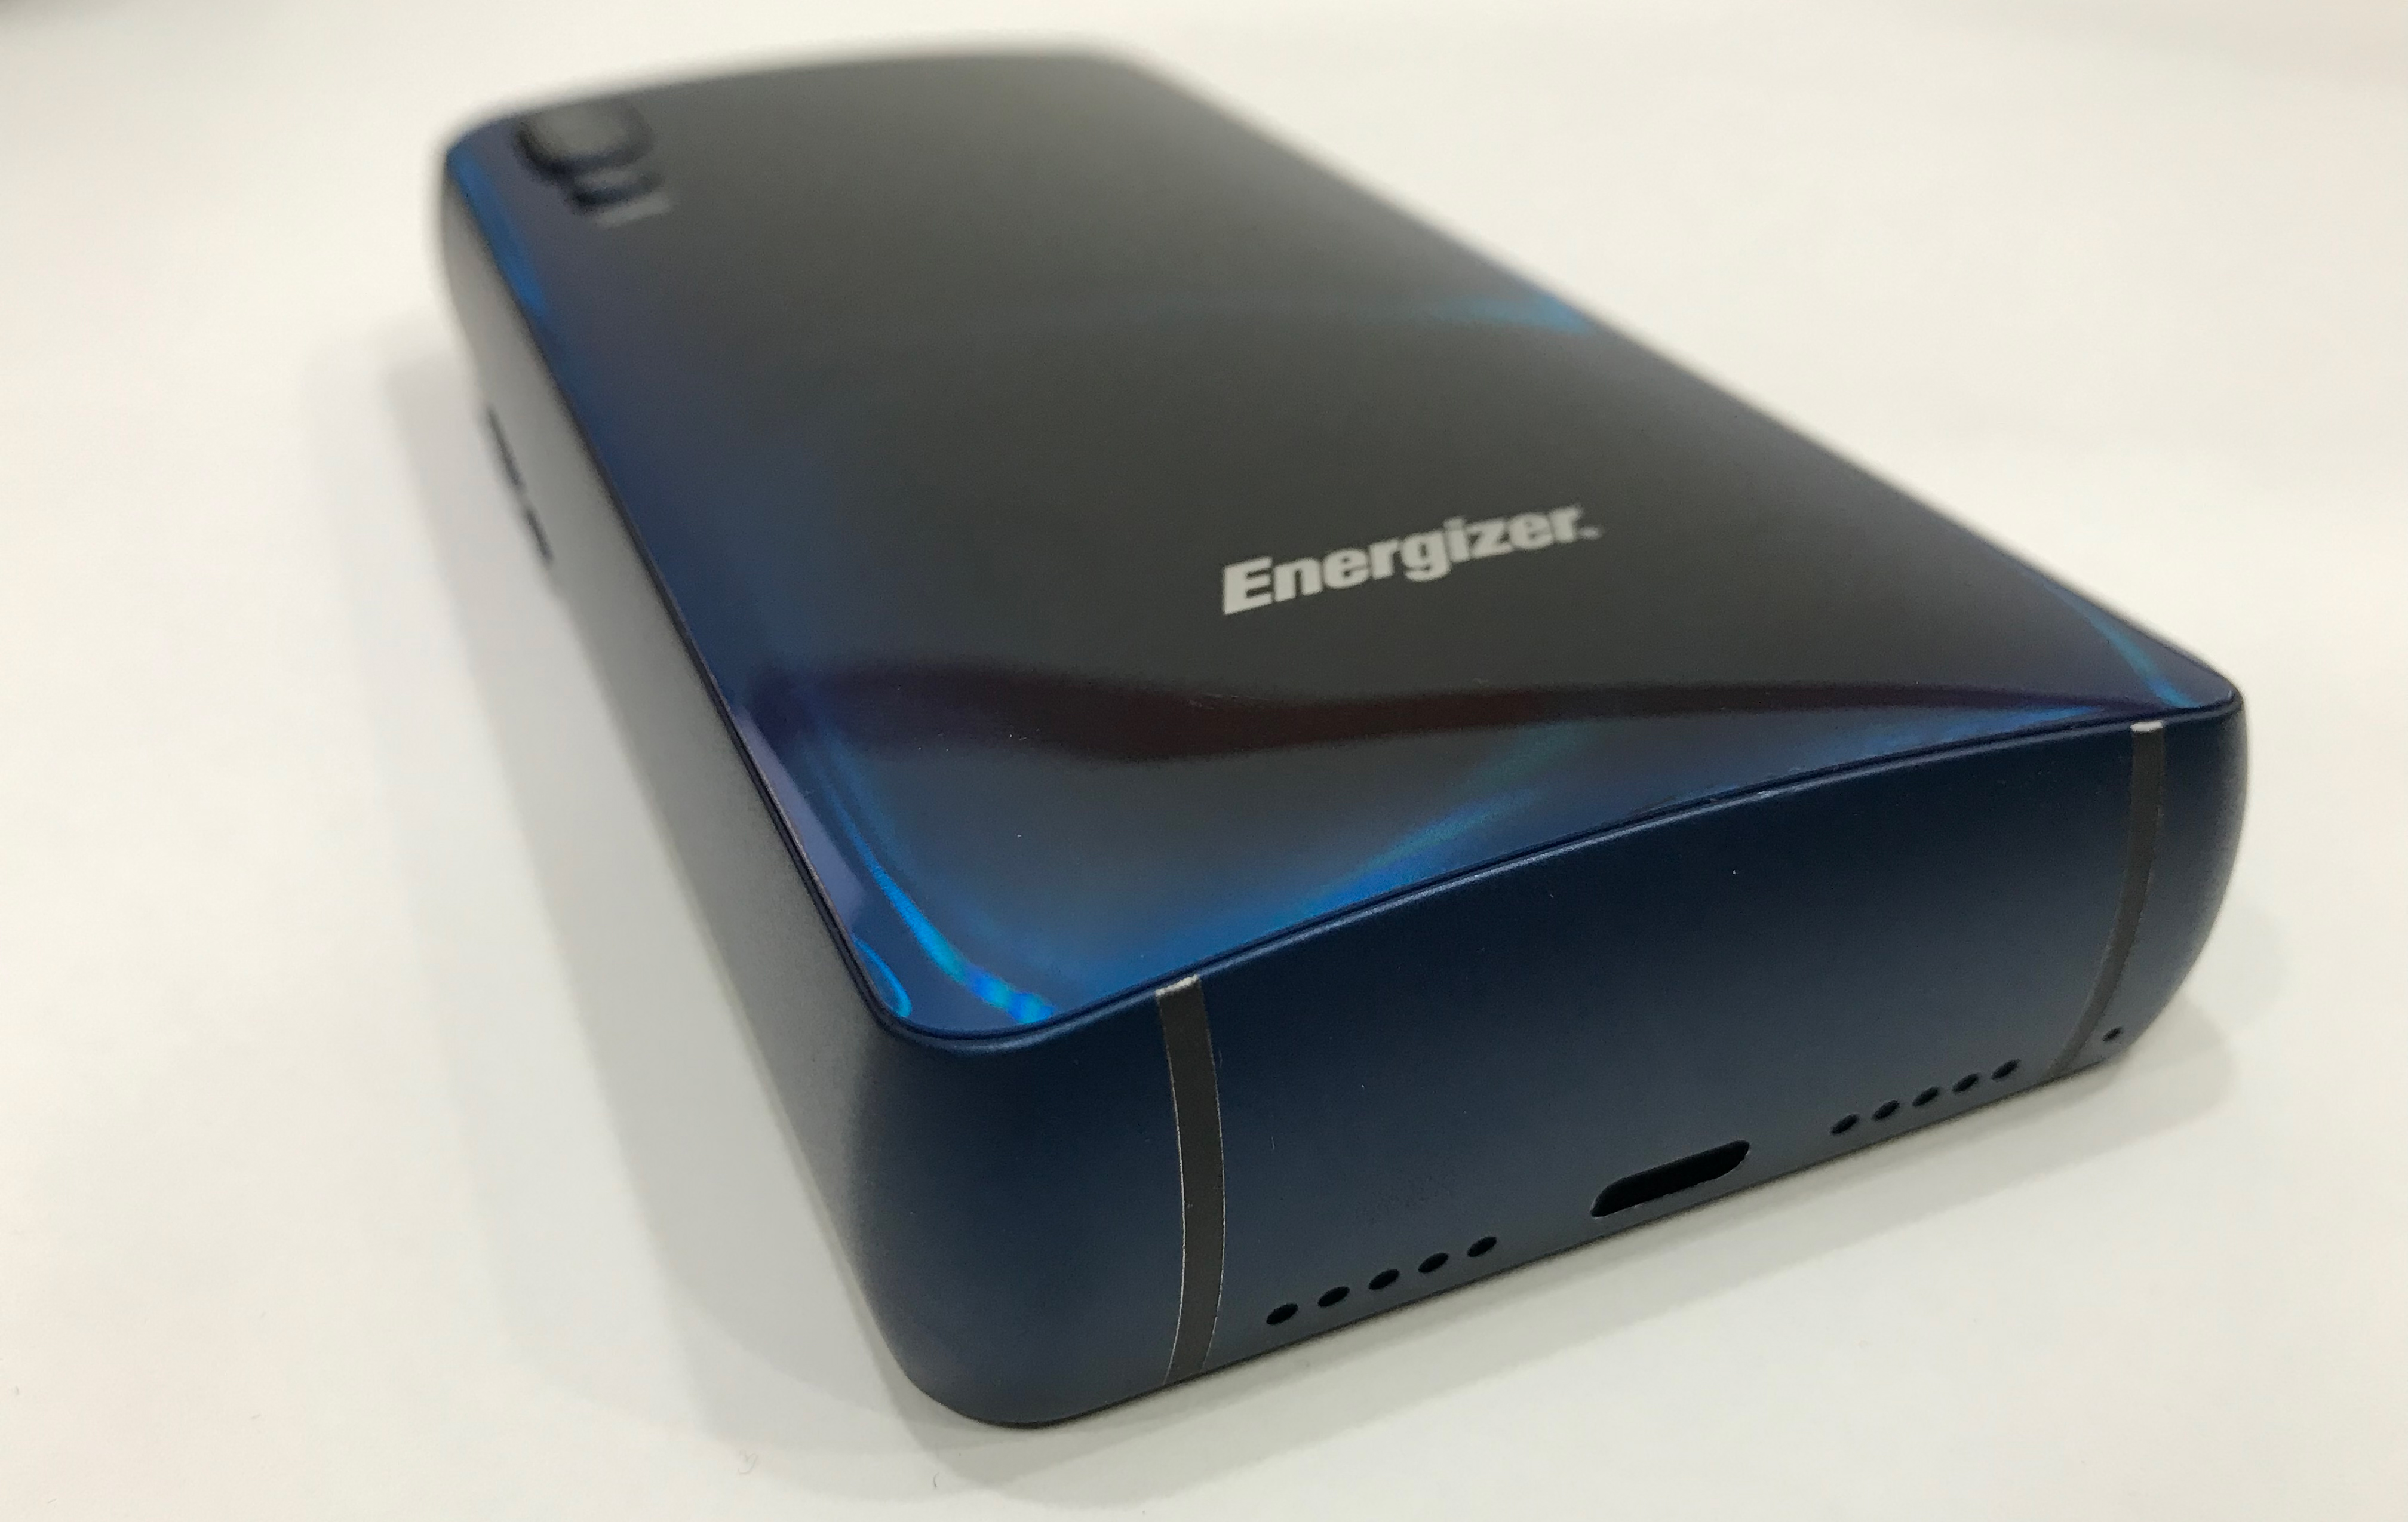 Energizer Power Max P18K Pop with 18,000 Battery at MWC 2019